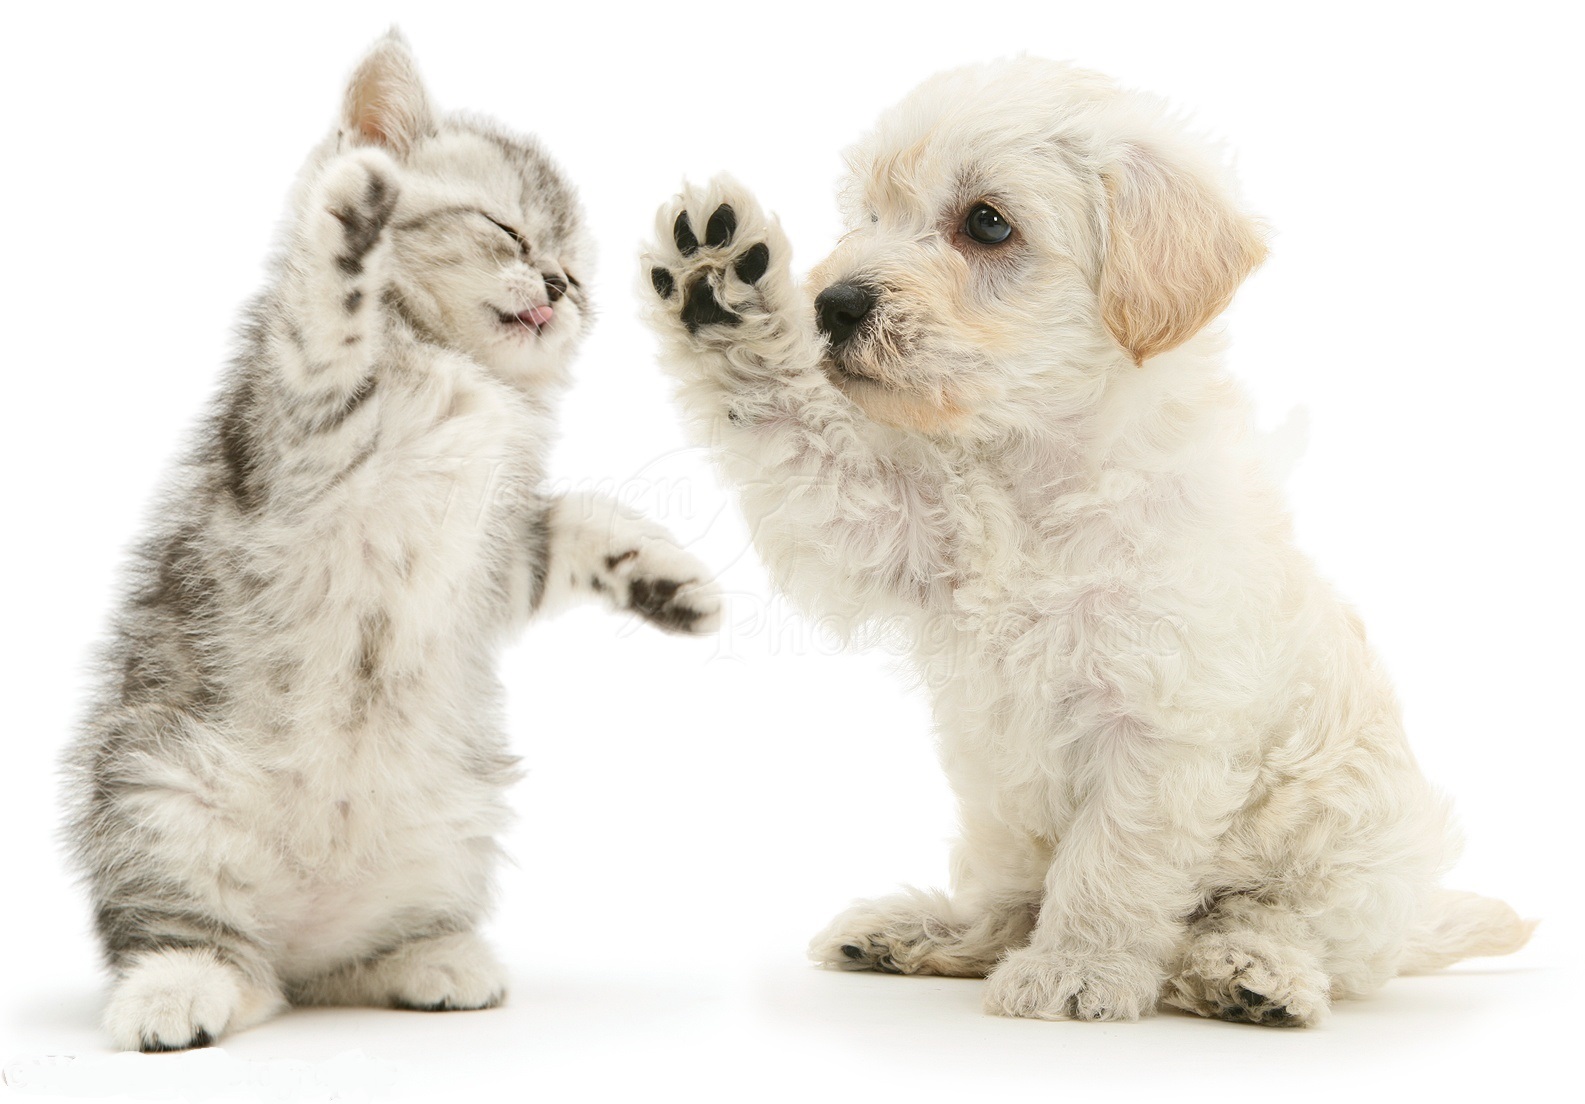 Woodle puppy and kitten boxing